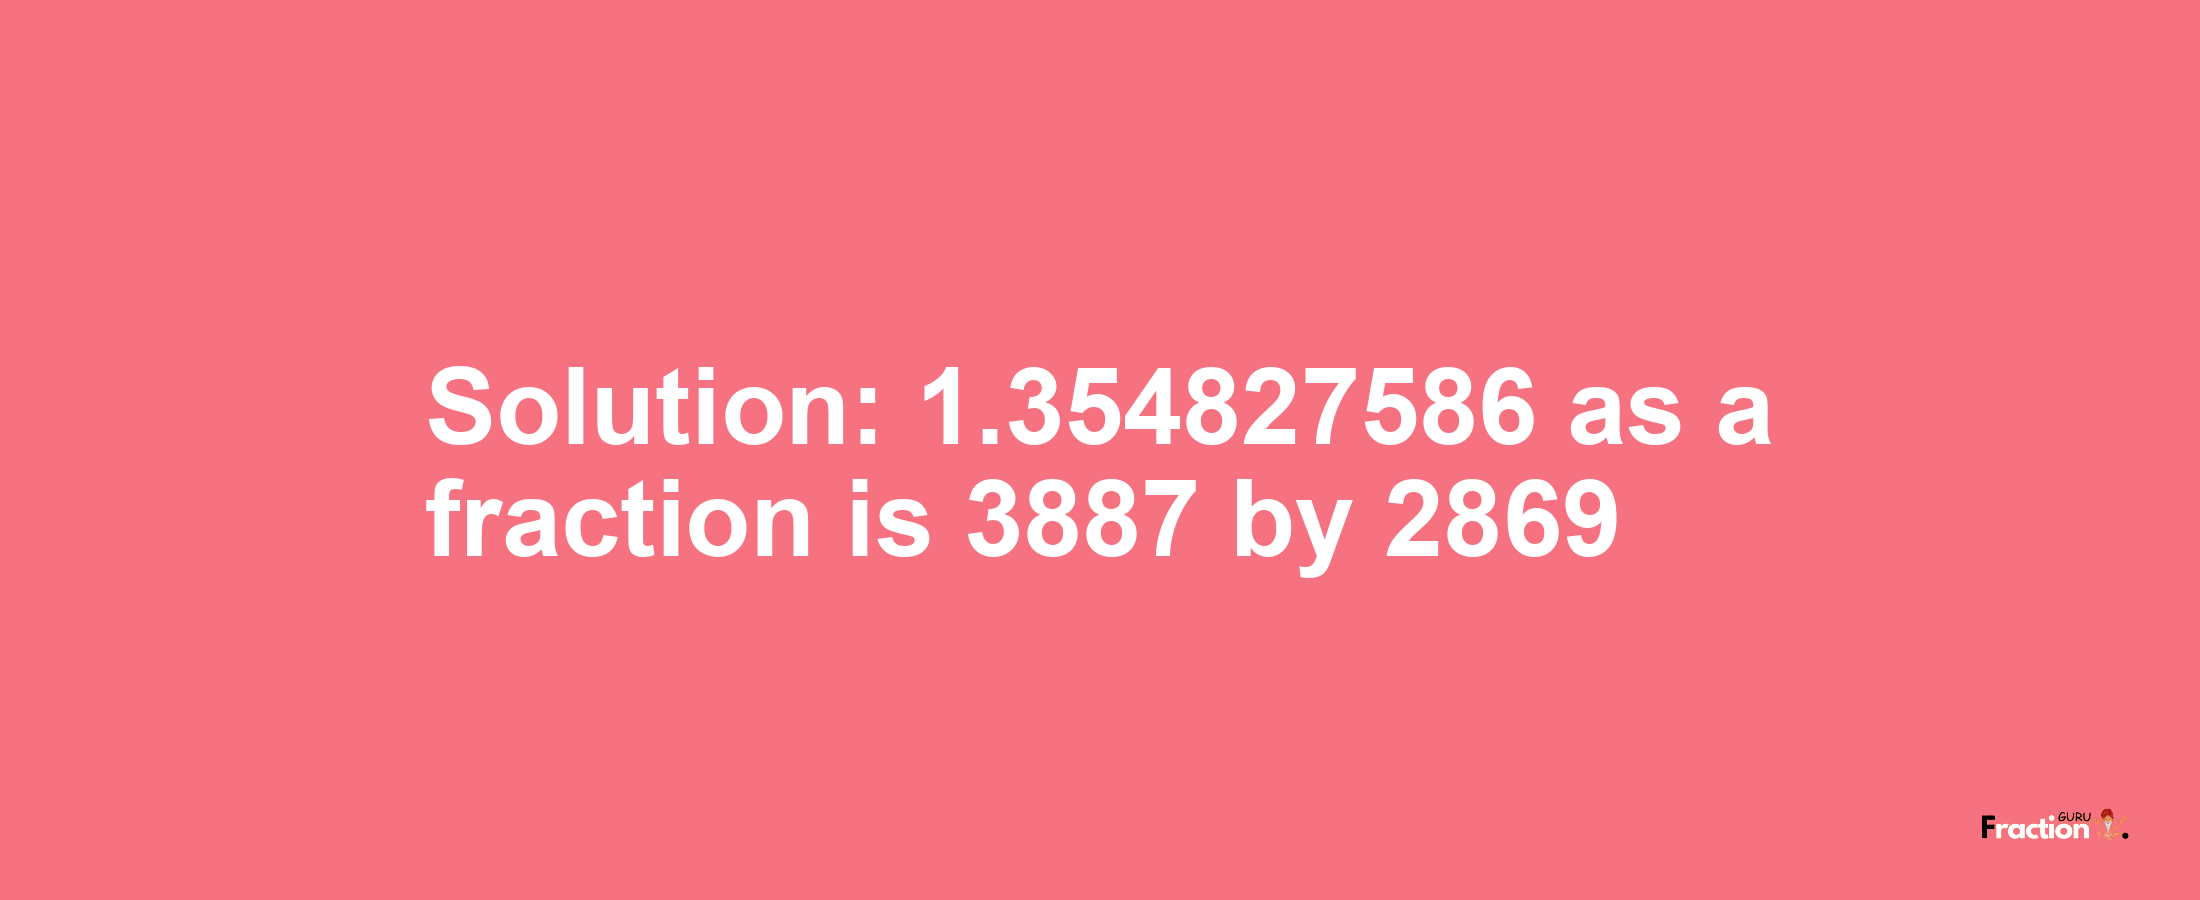 Solution:1.354827586 as a fraction is 3887/2869